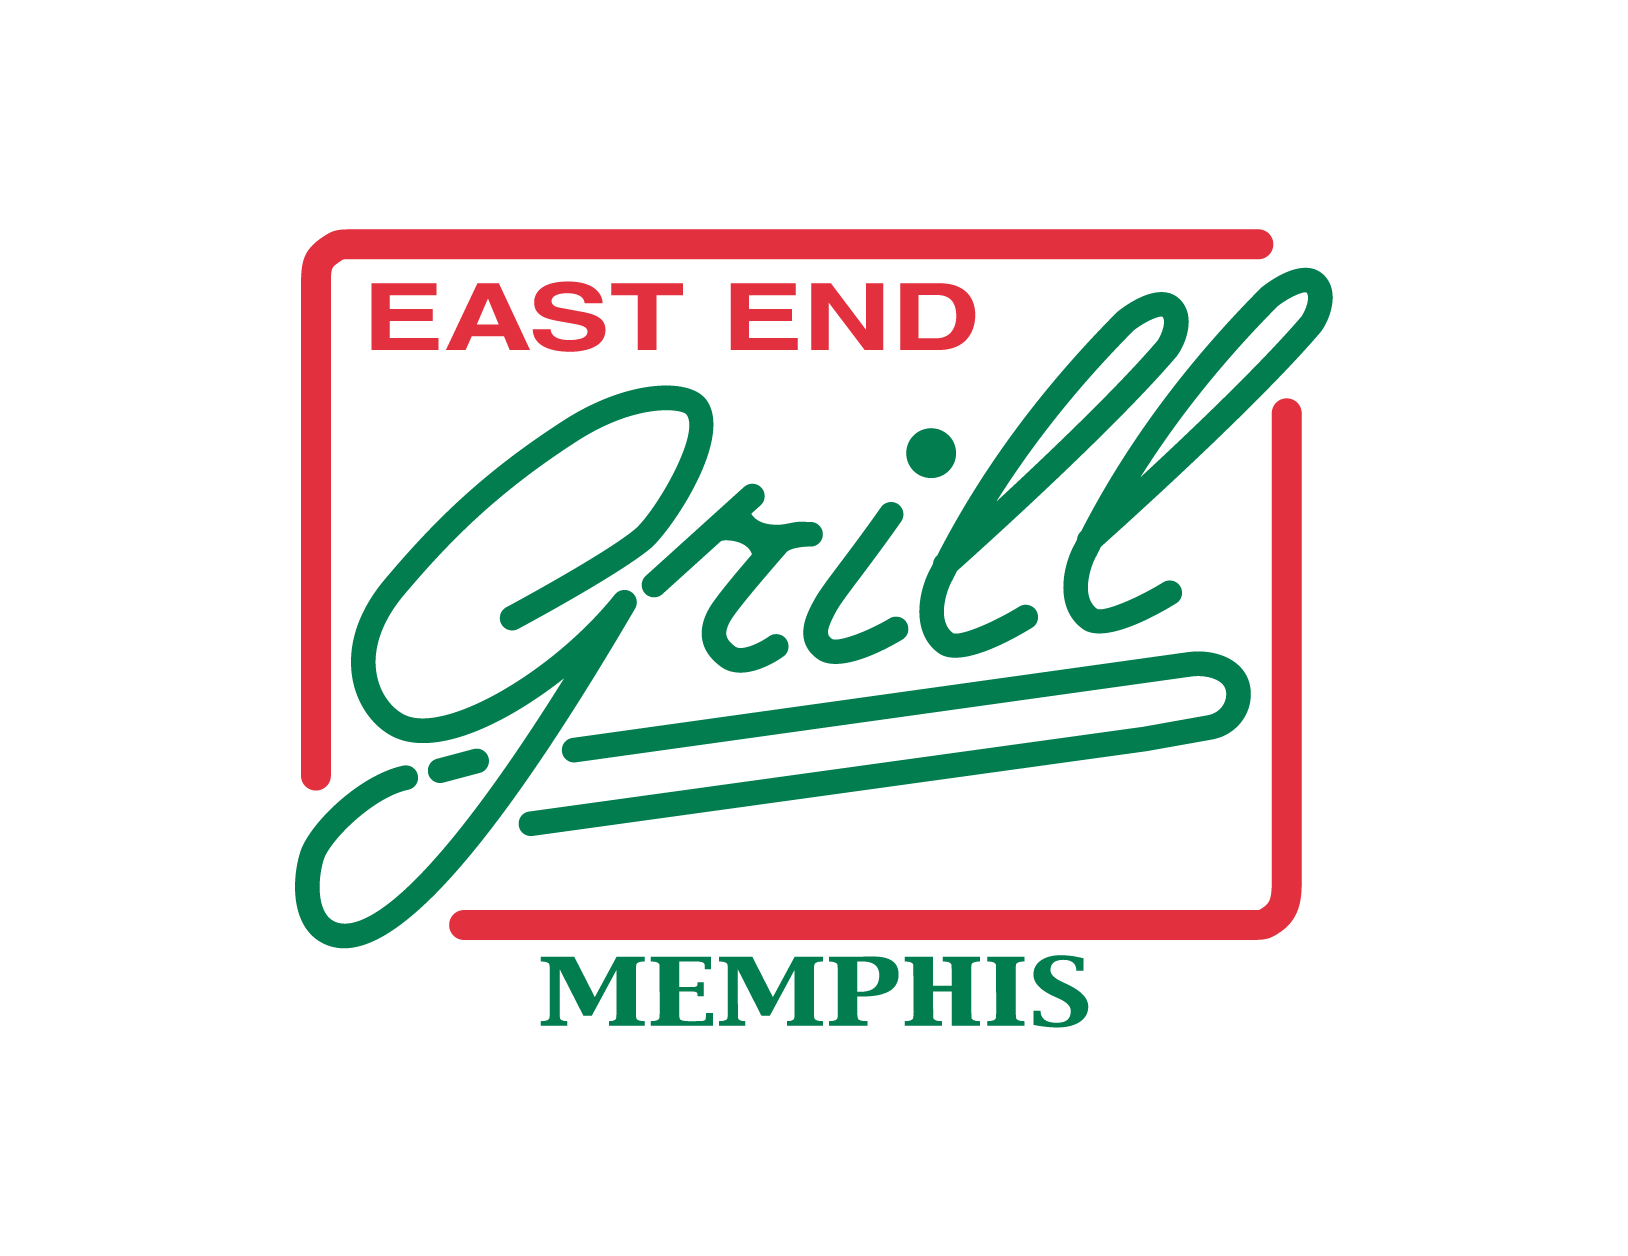 East End Grill